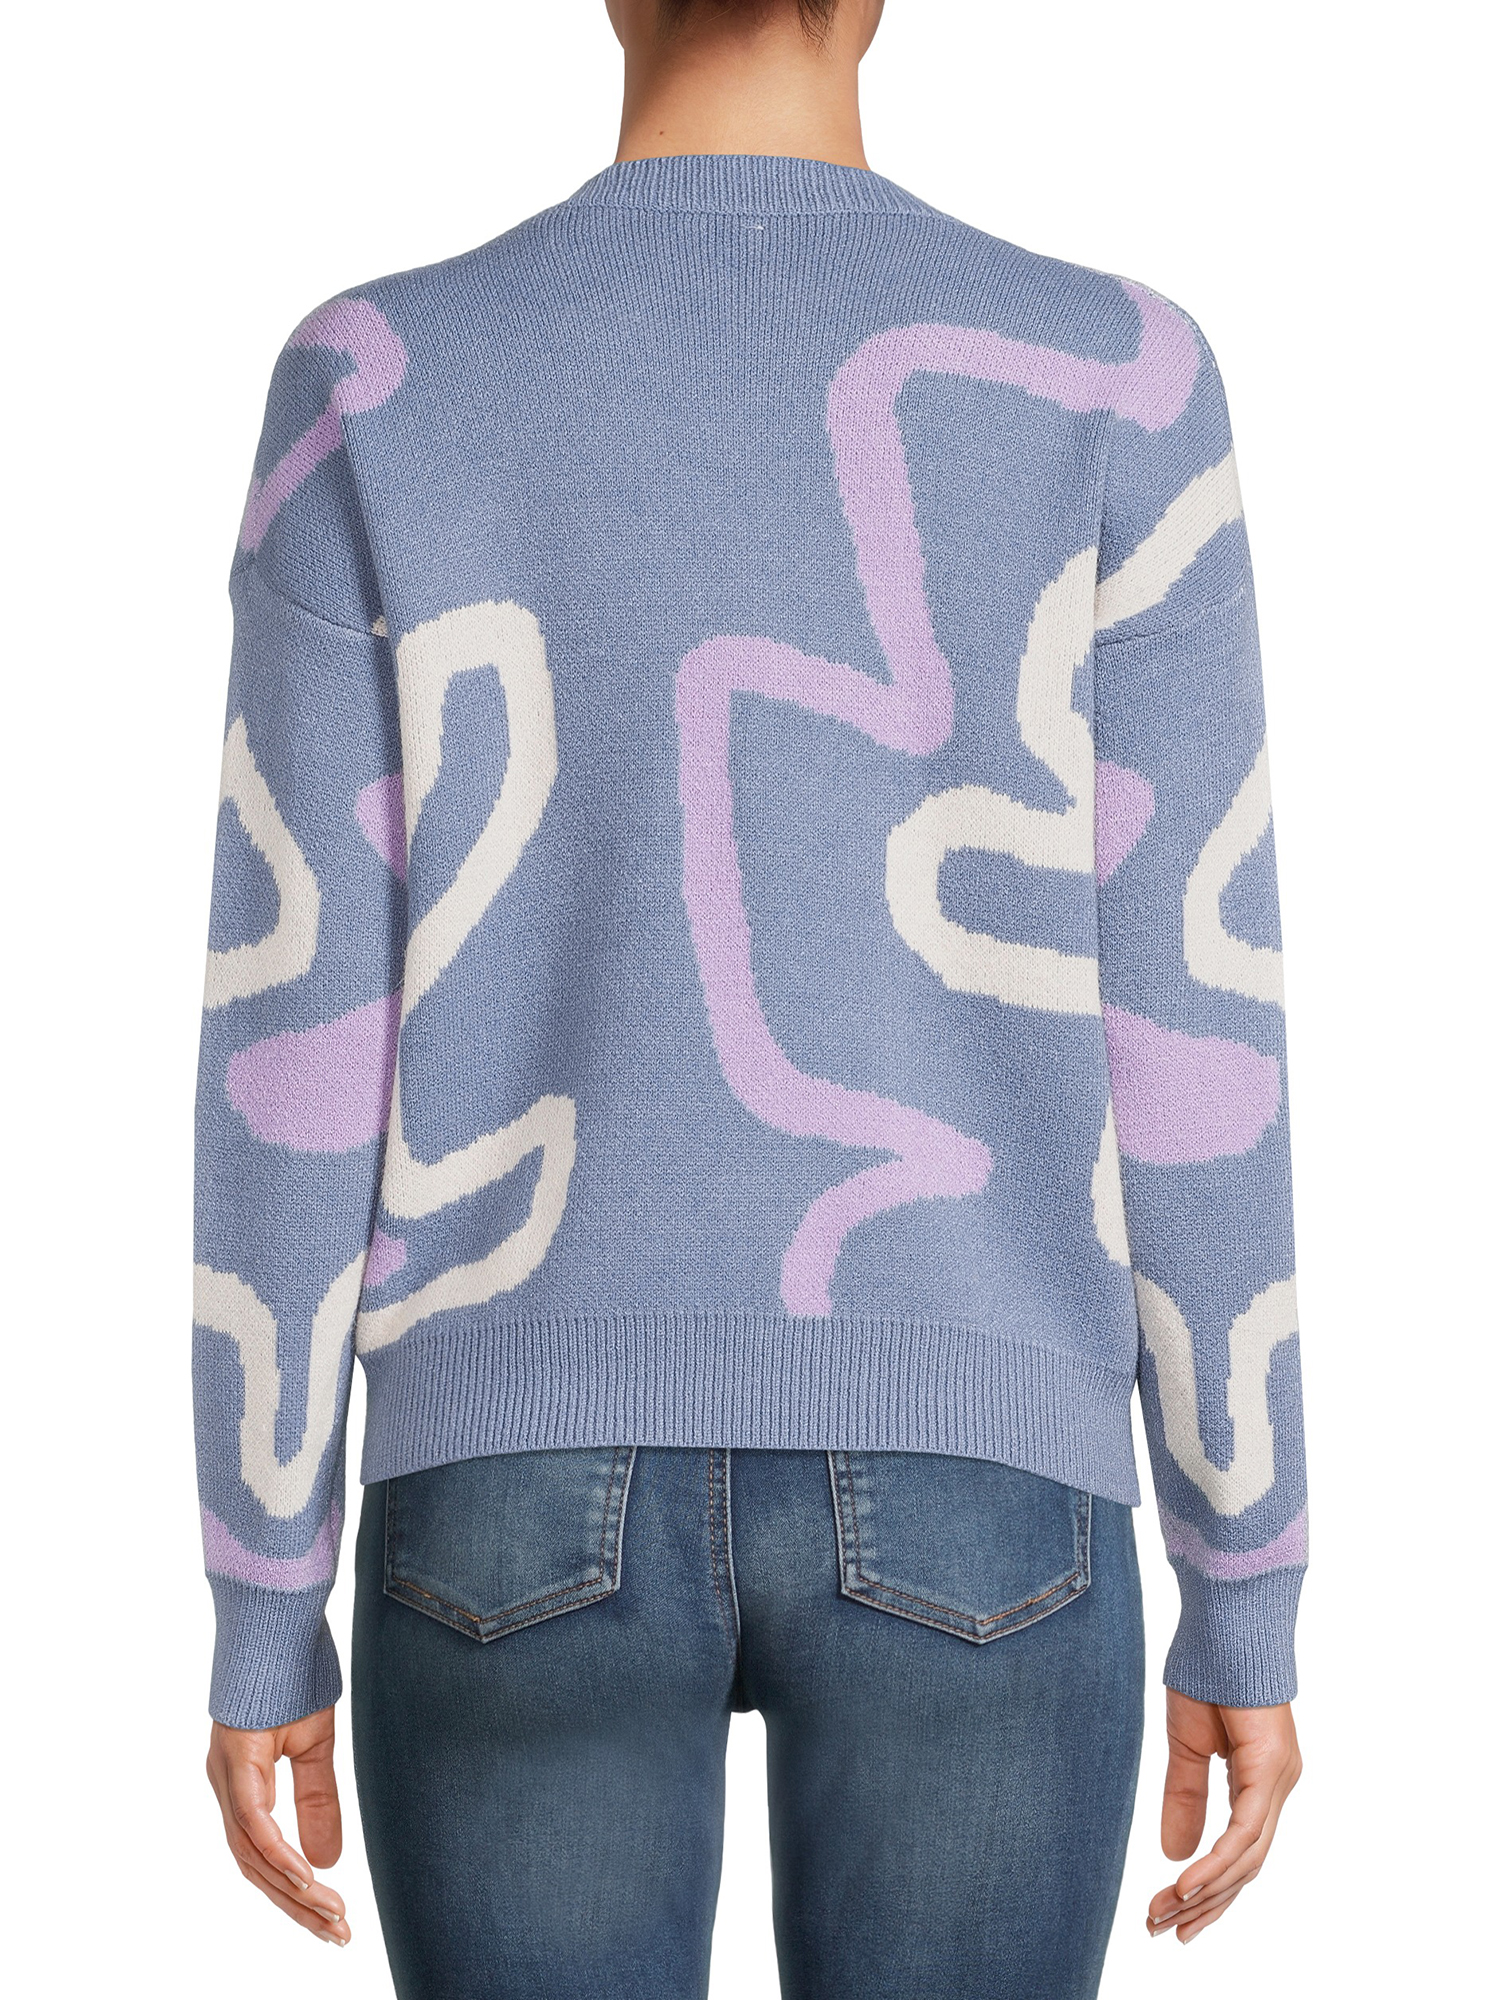 Dreamers by Debut Womens Print Pullover Long Sleeve Sweater - image 3 of 5